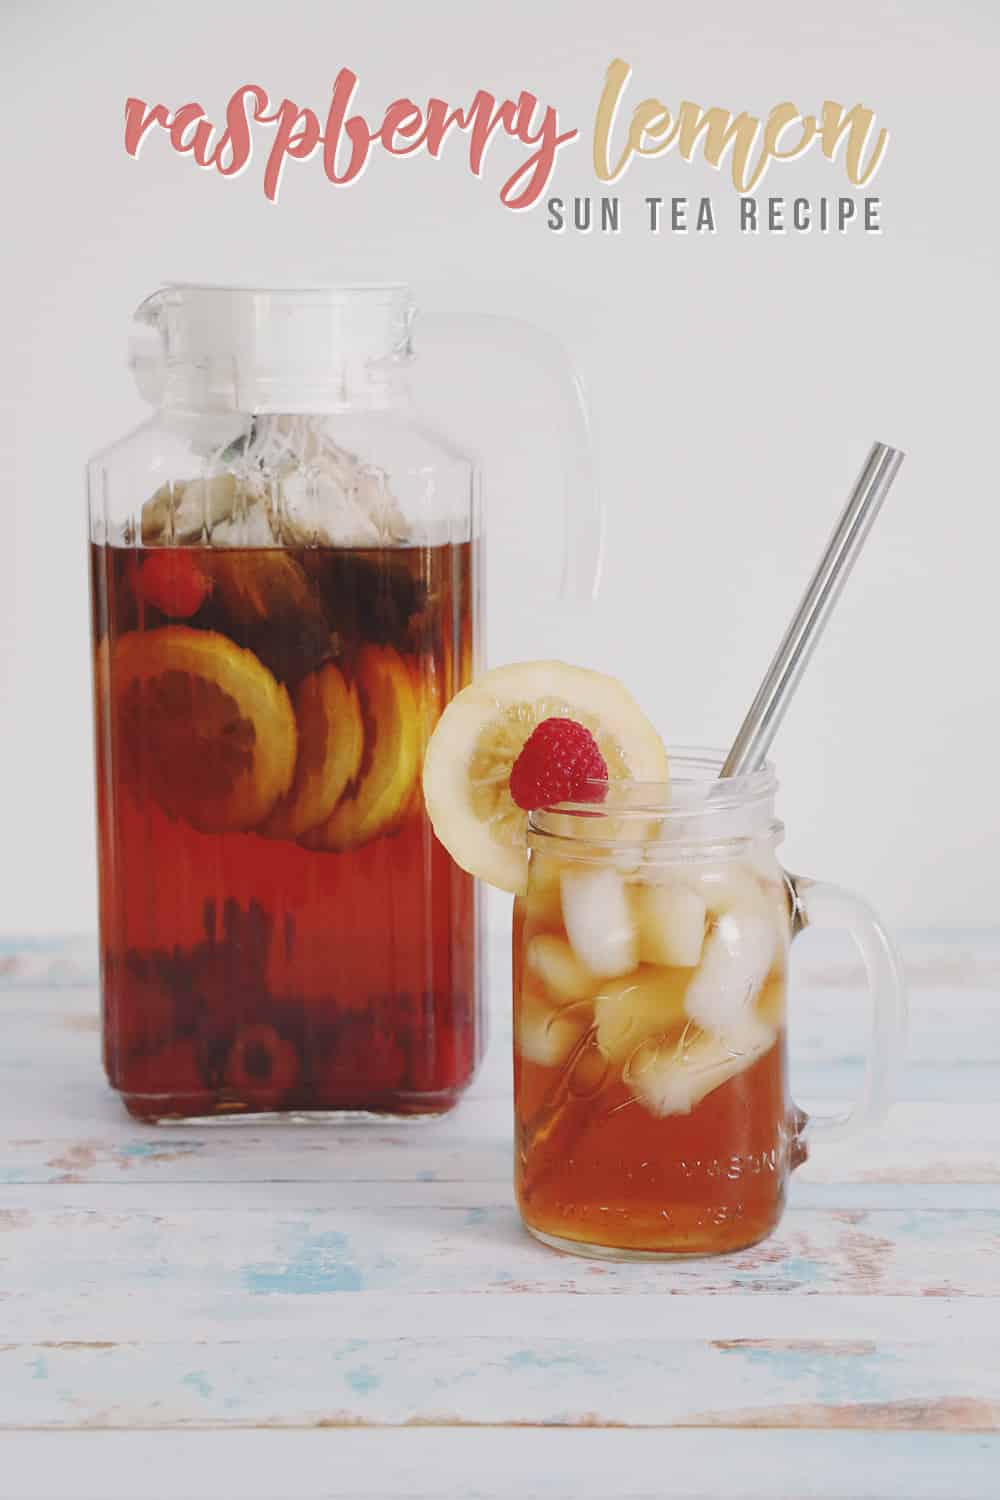 Cool off this Summer with this refreshing raspberry lemon sun tea recipe! It's a fun and fruity twist on your traditional sun tea!